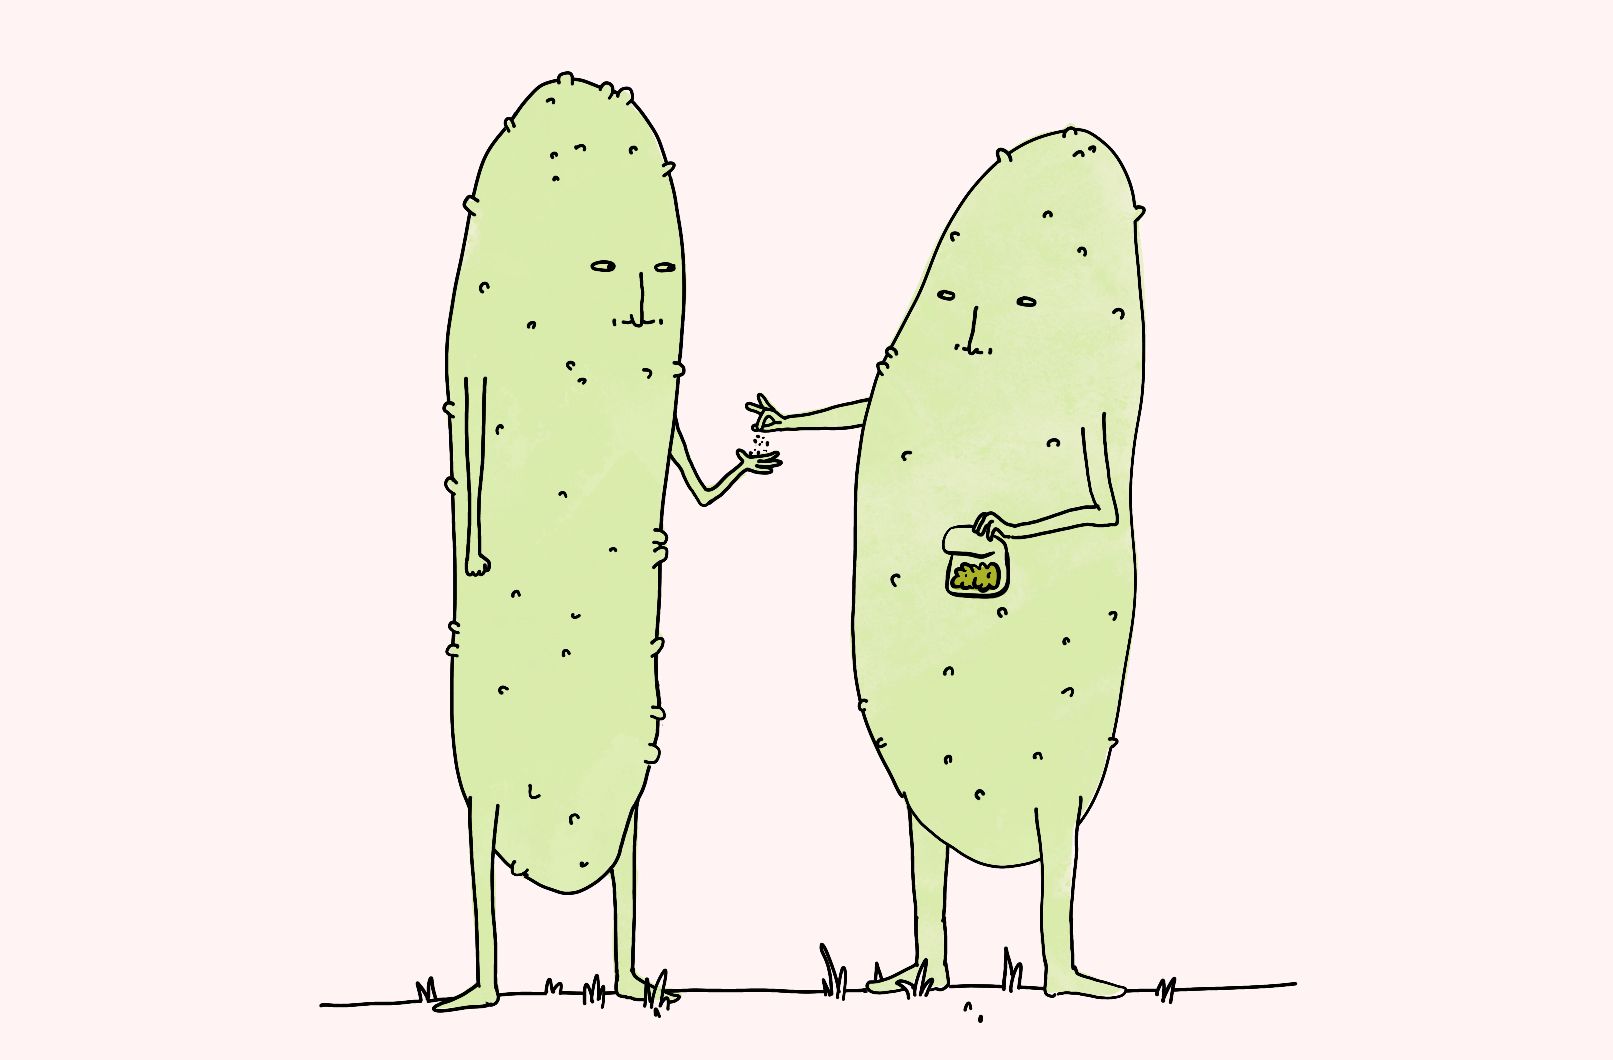 Two consenting pickles sharing a bag of dill